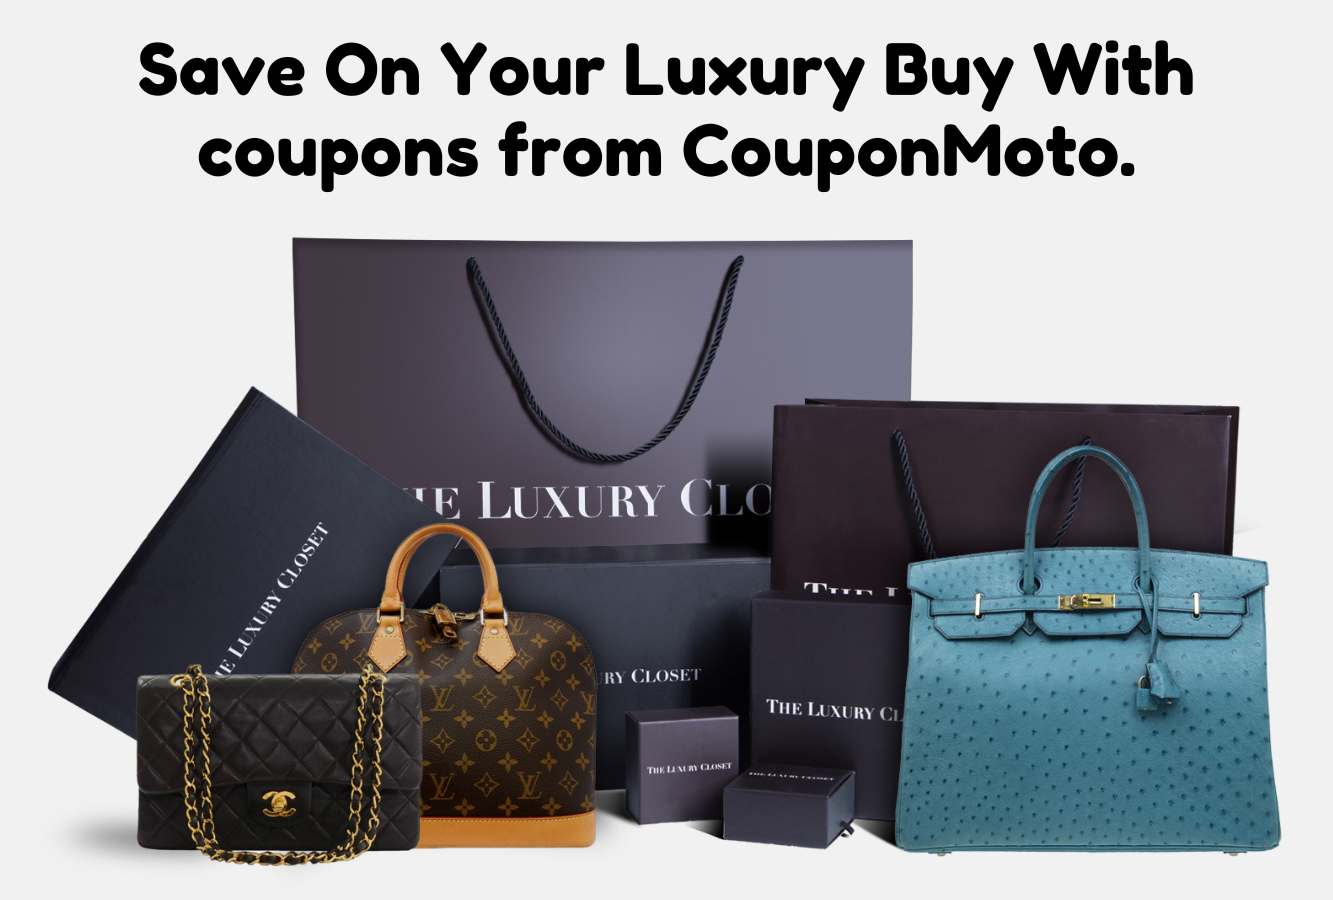 Save On Your Luxury Buy With coupons from-CouponMoto